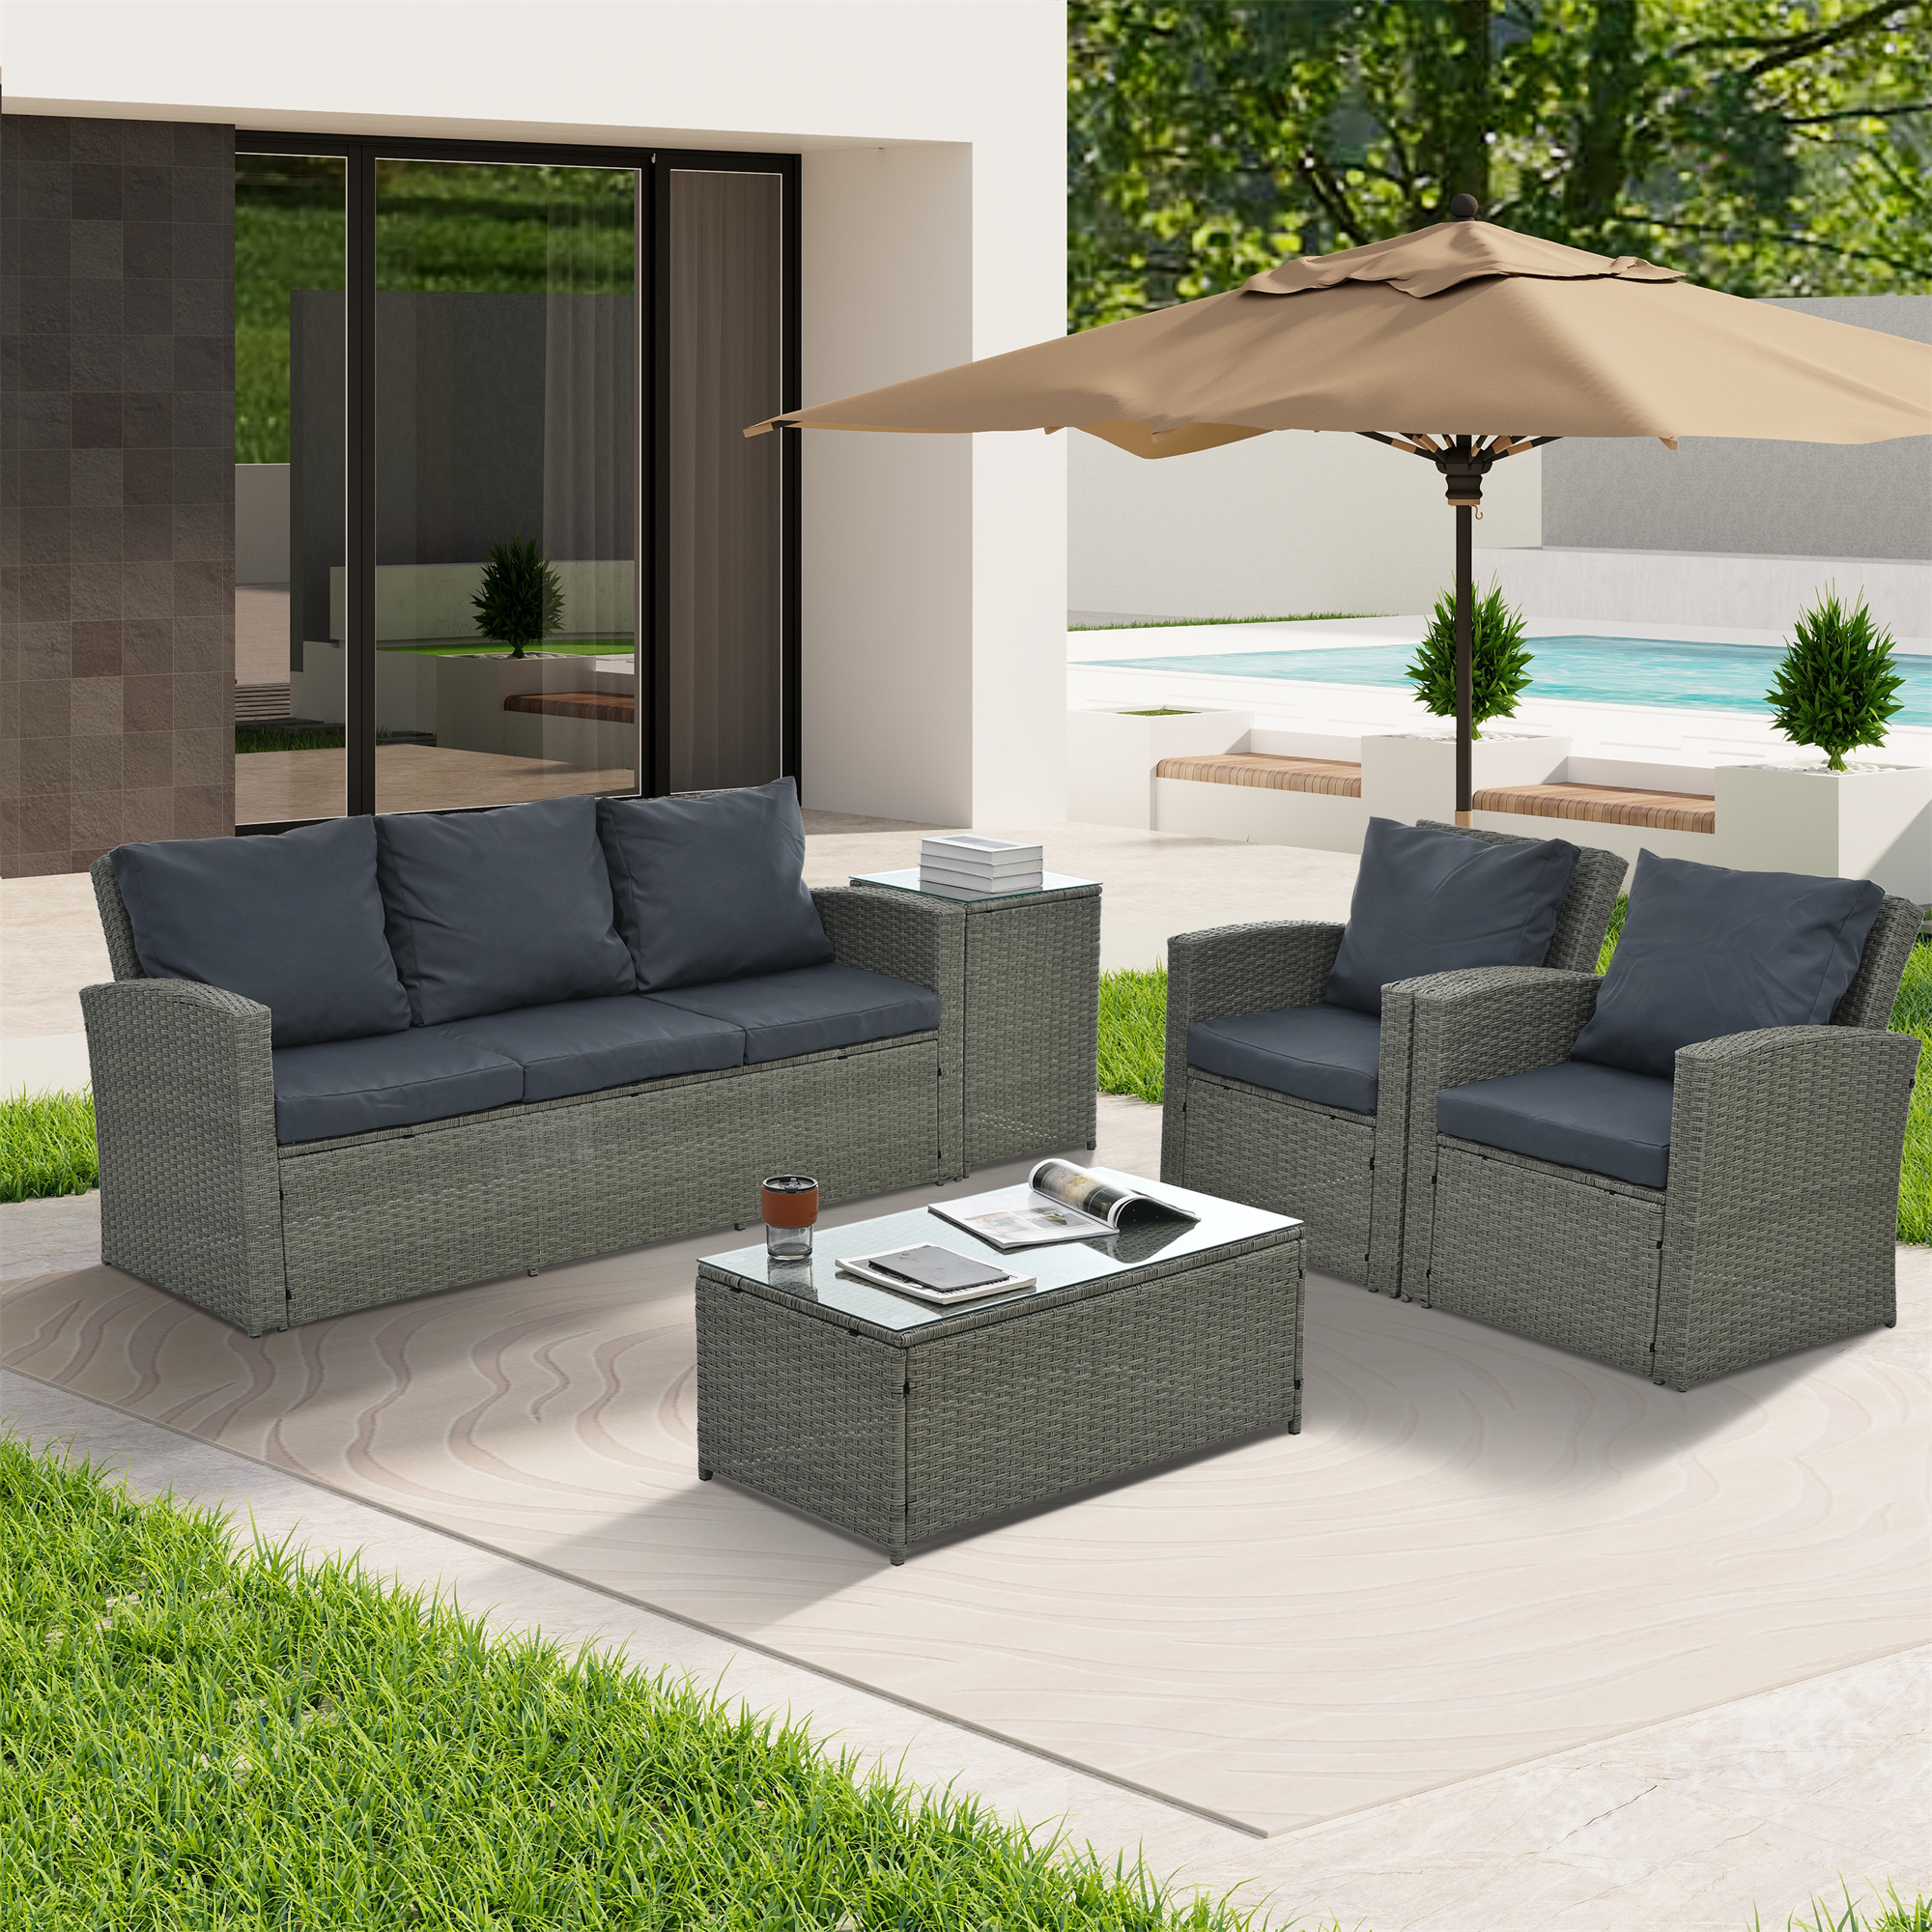 Highsound 5 Pieces Patio Furniture Set, All-Weather PE Rattan Wicker Patio Conversation Set, Cushioned Sofa Set with 2 Glass Tables for Patio Garden Poolside Deck, Gray Cushions - image 1 of 9